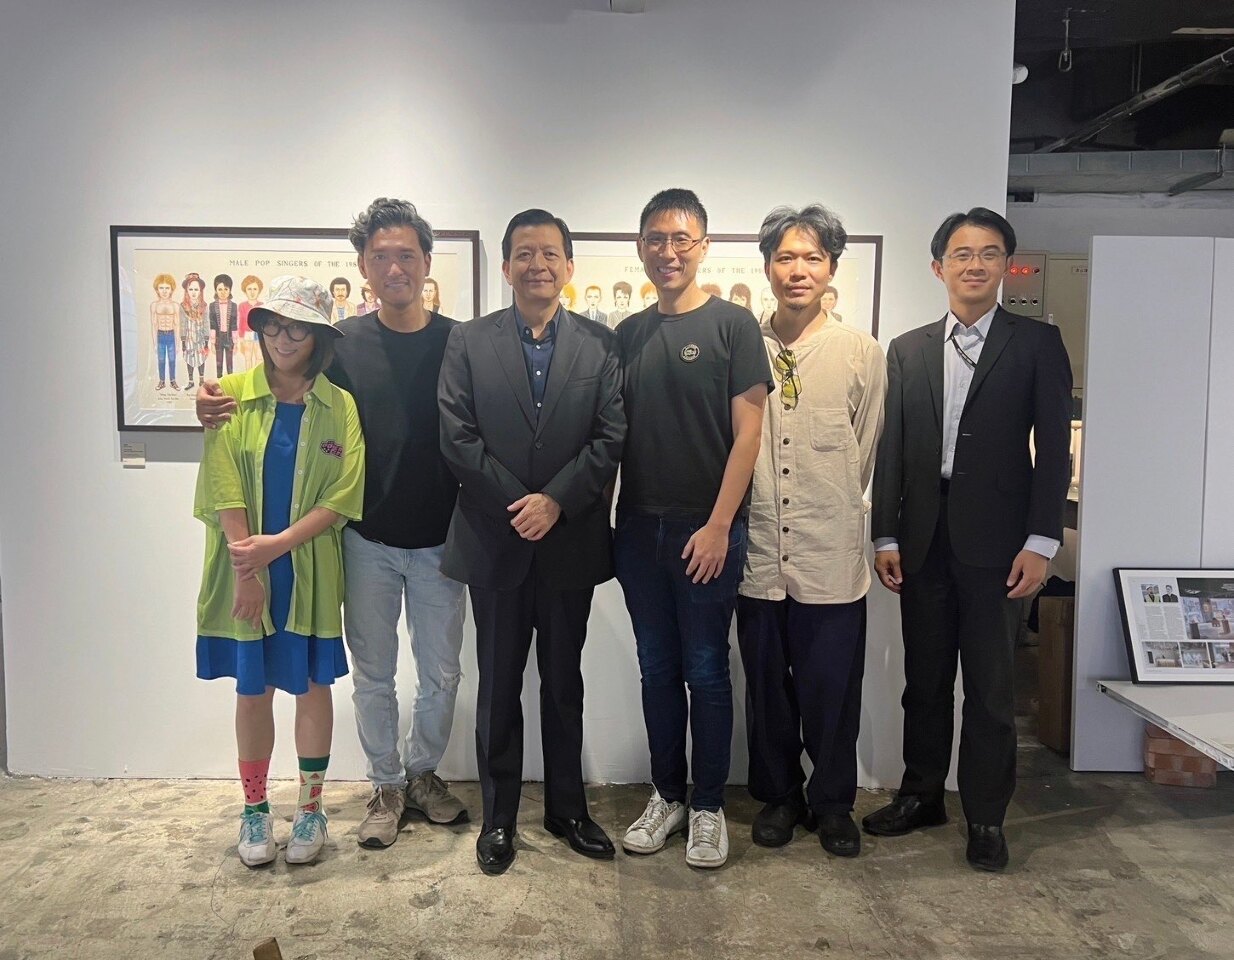 Hong Kong artists in Taiwan share culture through art at The Blue